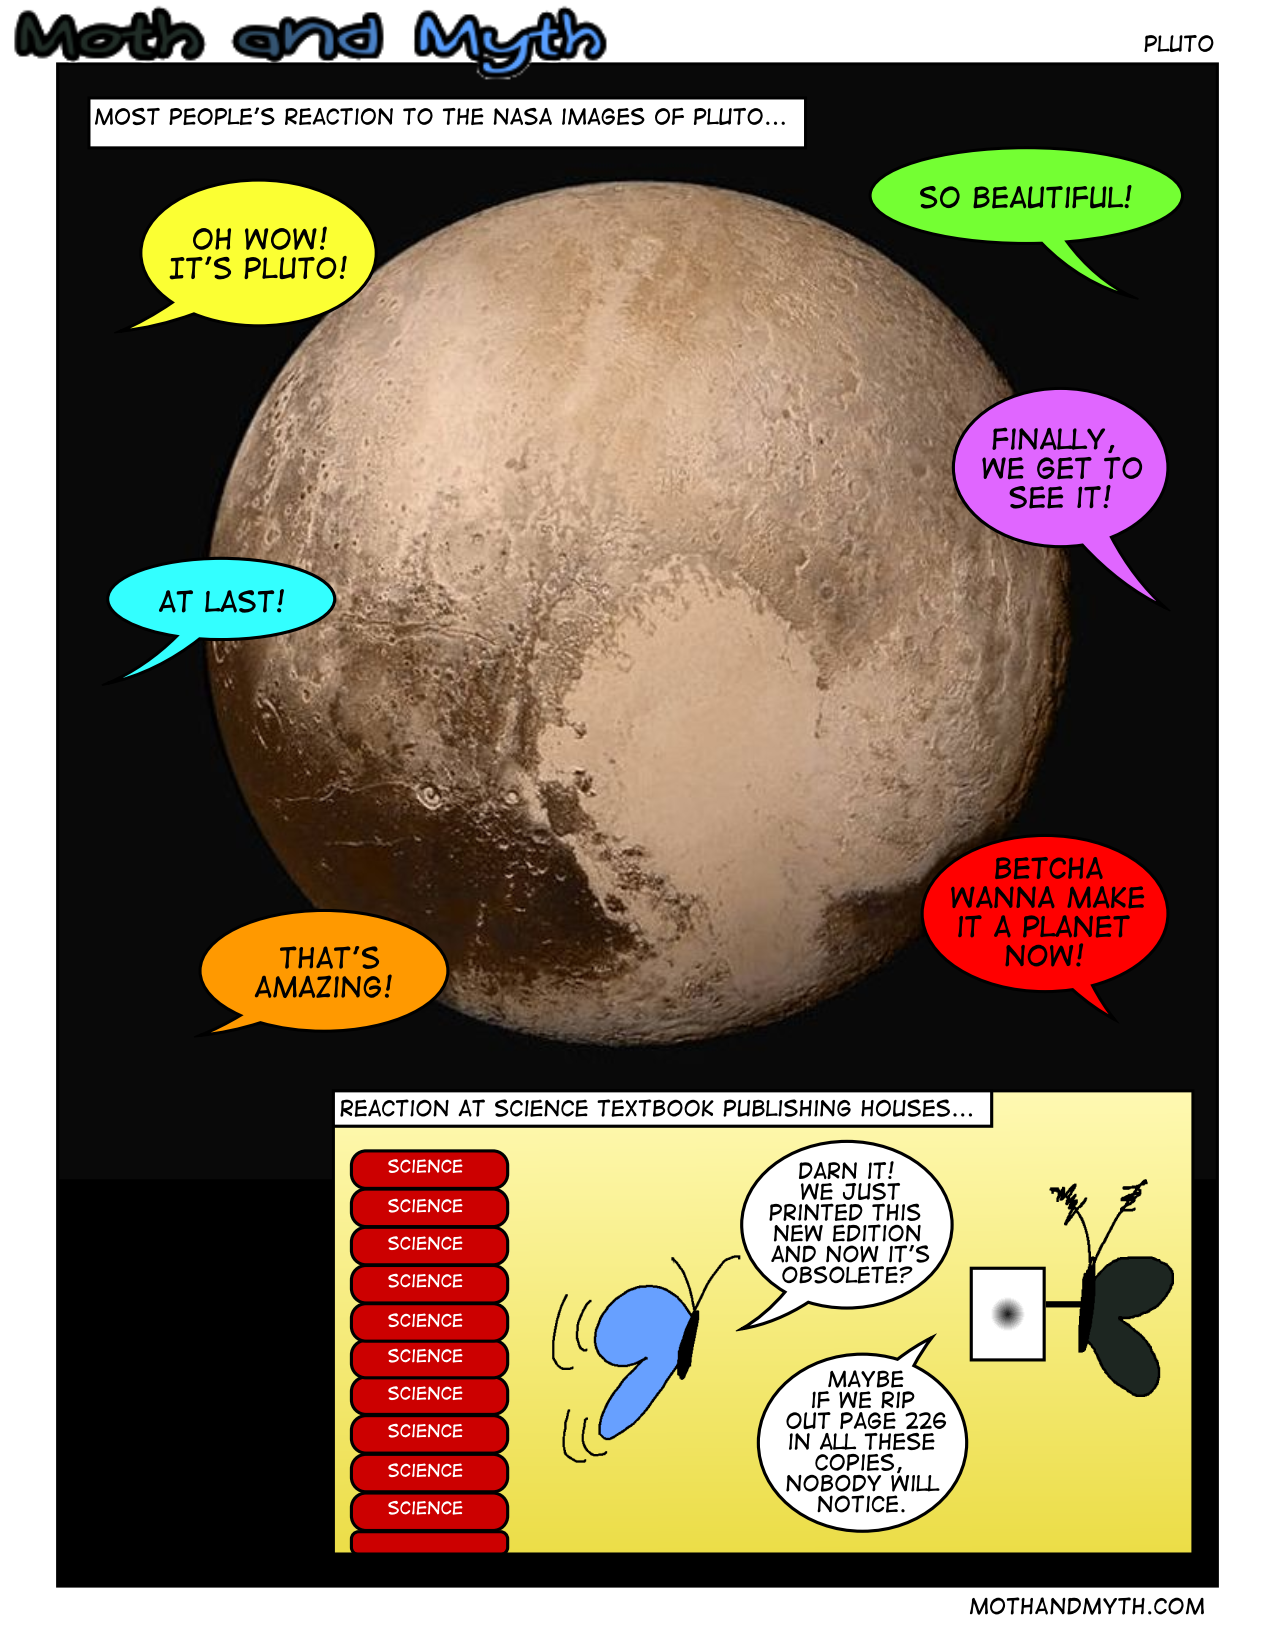 "Maybe if we just pretend that Pluto isn't a planet, we can omit it without anyone noticing..."